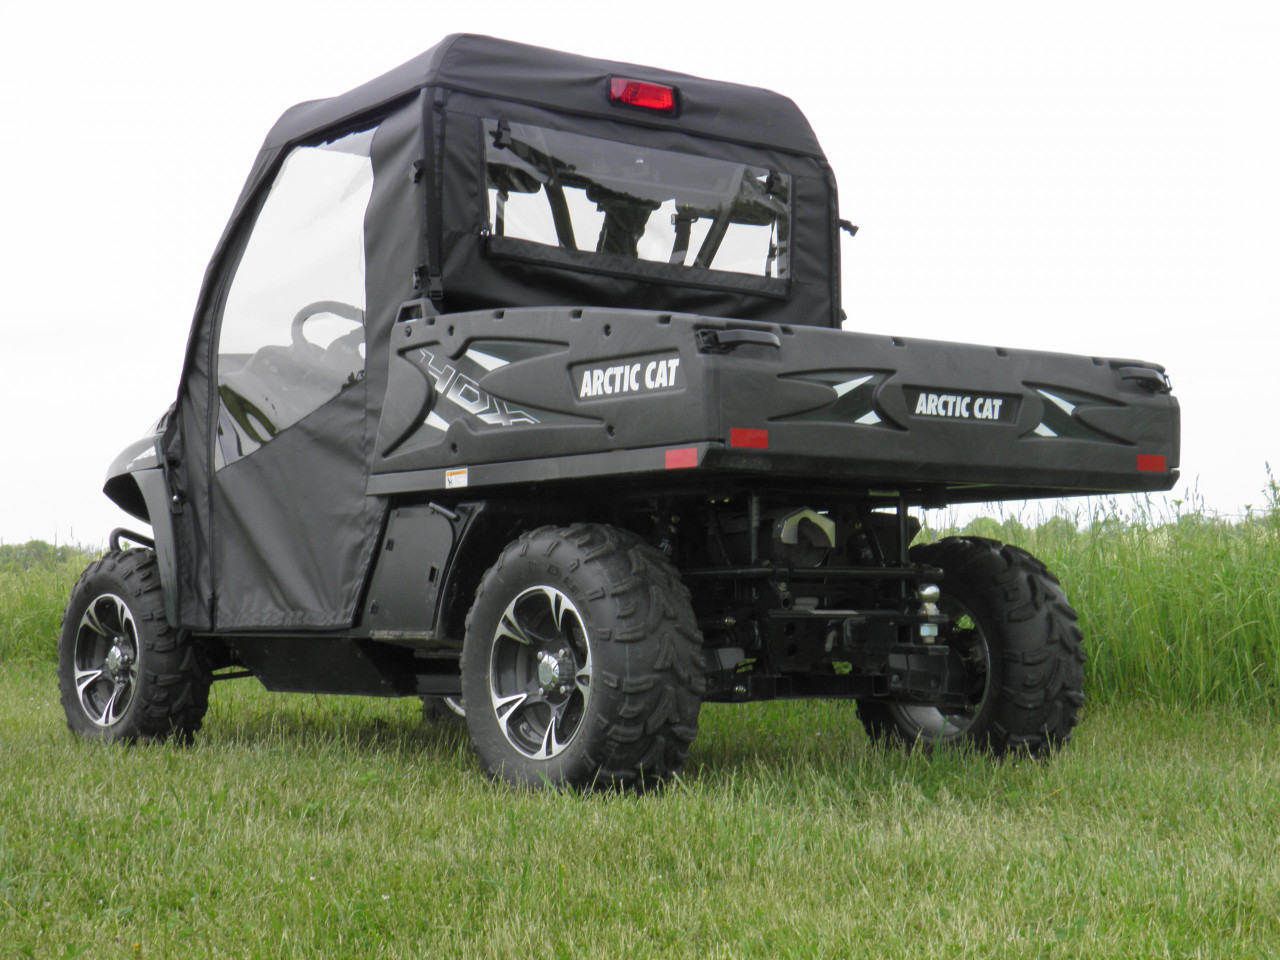 Full cab enclosure side and rear view